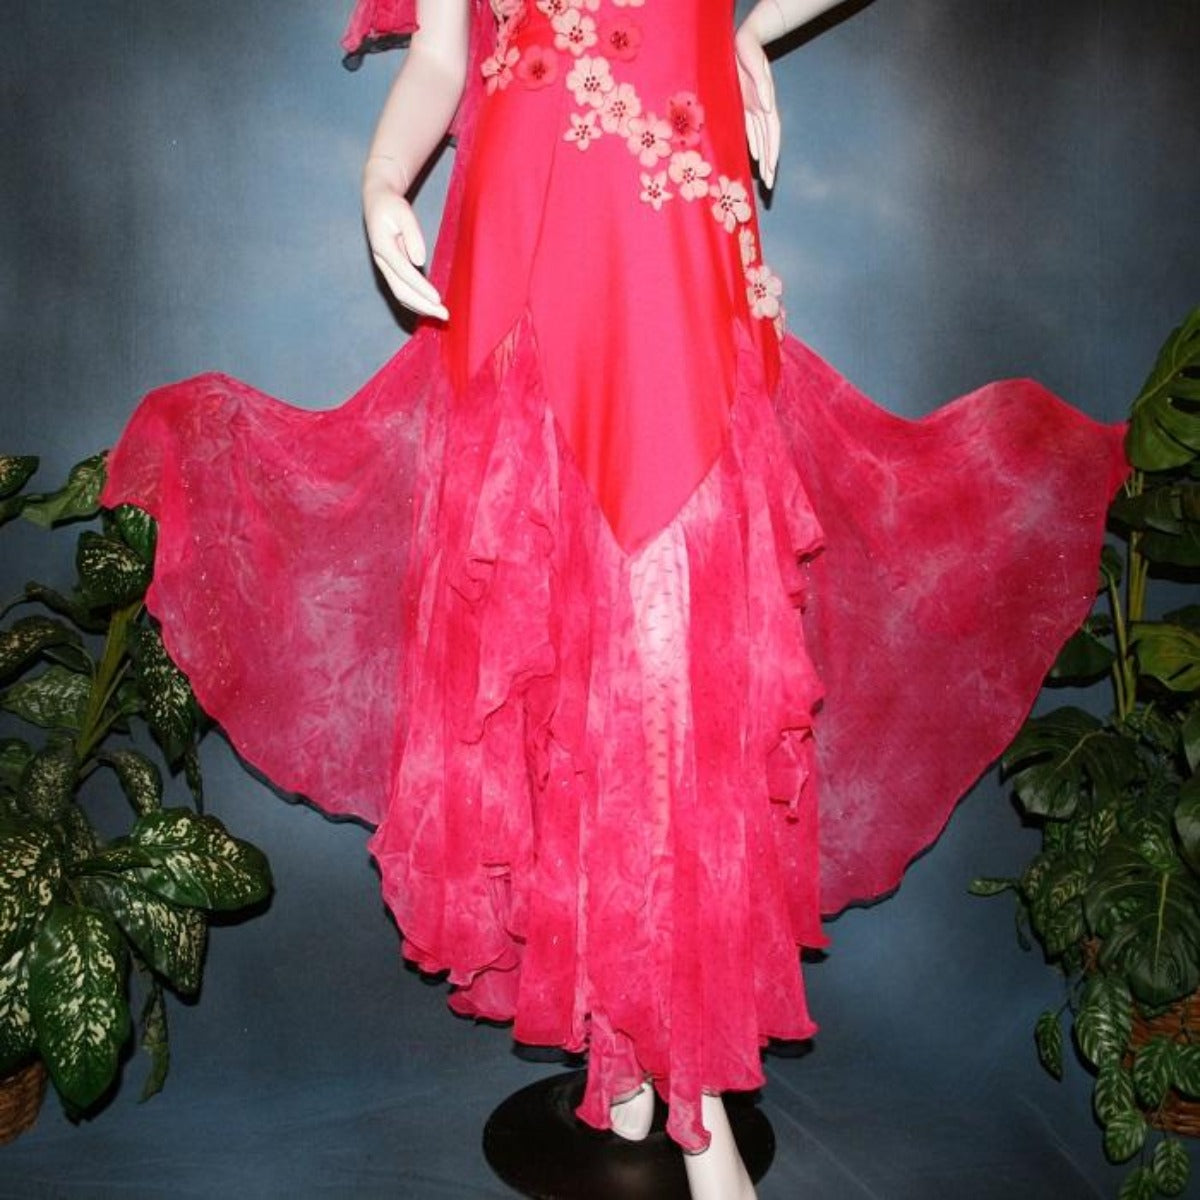 Crystal's Creations close bottom view of Deep pink ballroom dress created of Indian pink lycra base with yards & yards of Indian pink print chiffon large & flowing flounces, embellishing done with silk flowers, accented with Swarovski stonework in Indian pink 